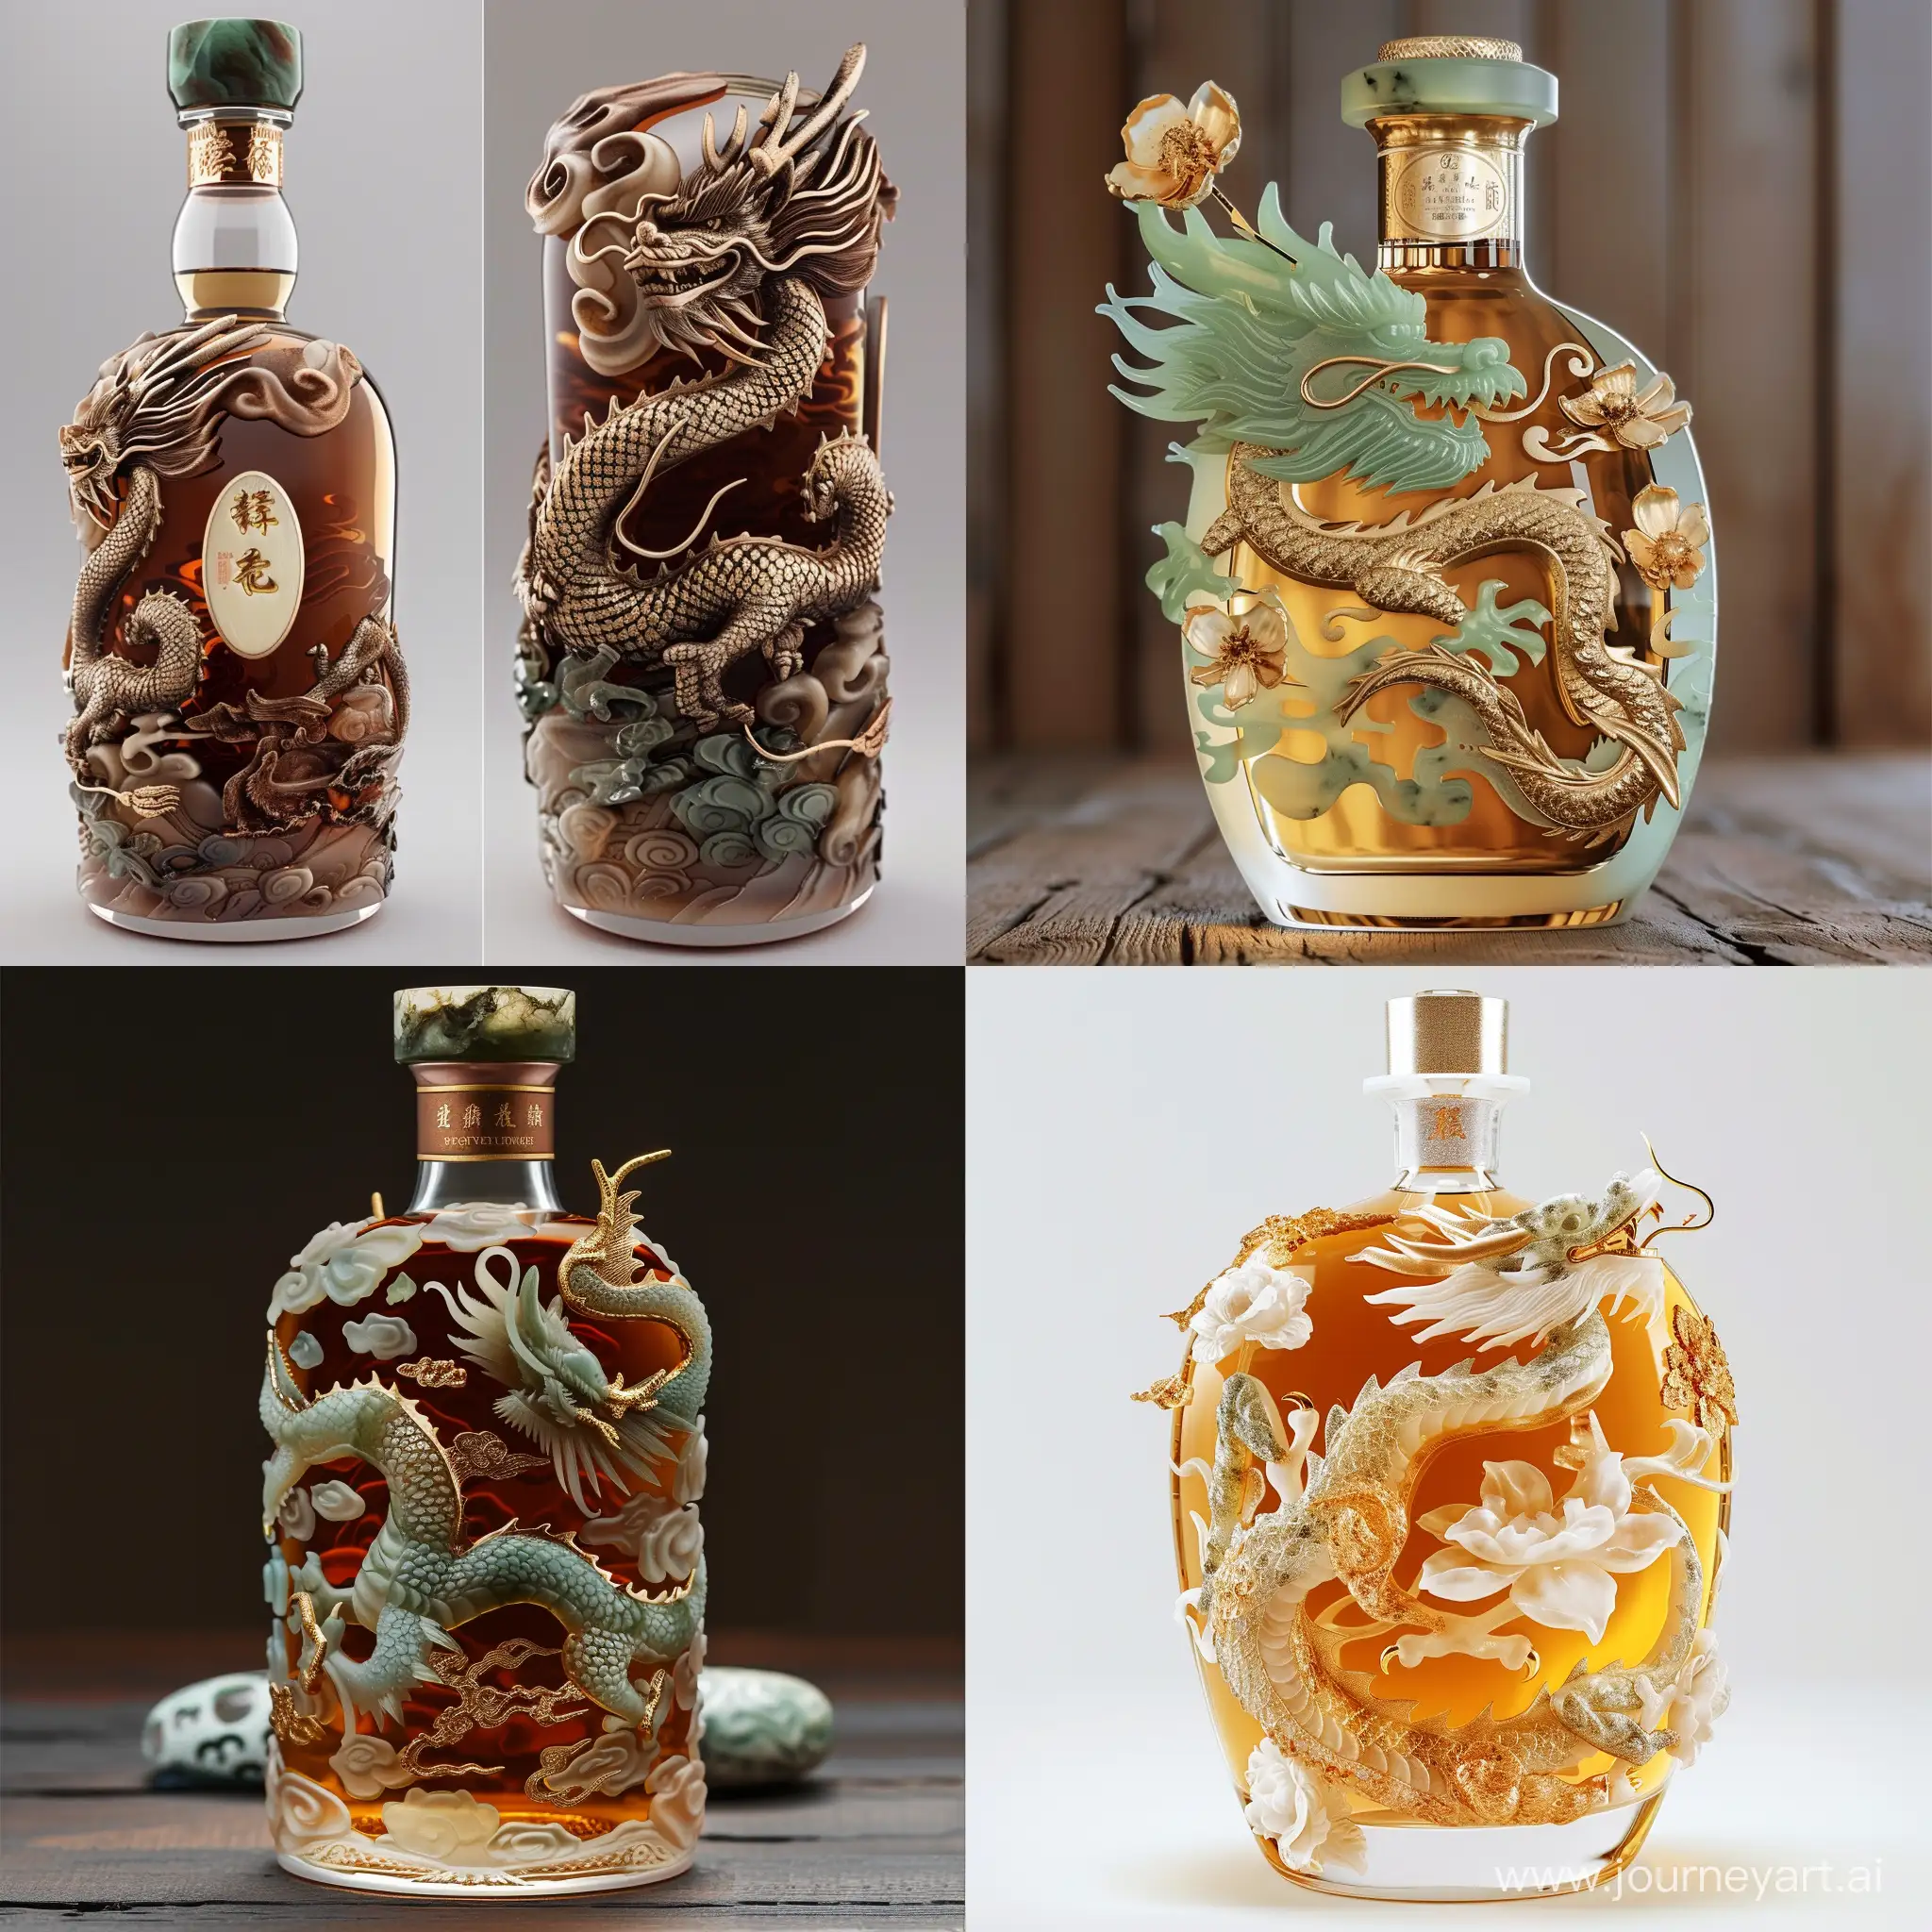 Limited-Edition-Chinese-New-Year-Whisky-Bottle-with-3D-Dragon-Design-in-Jade-and-Gold